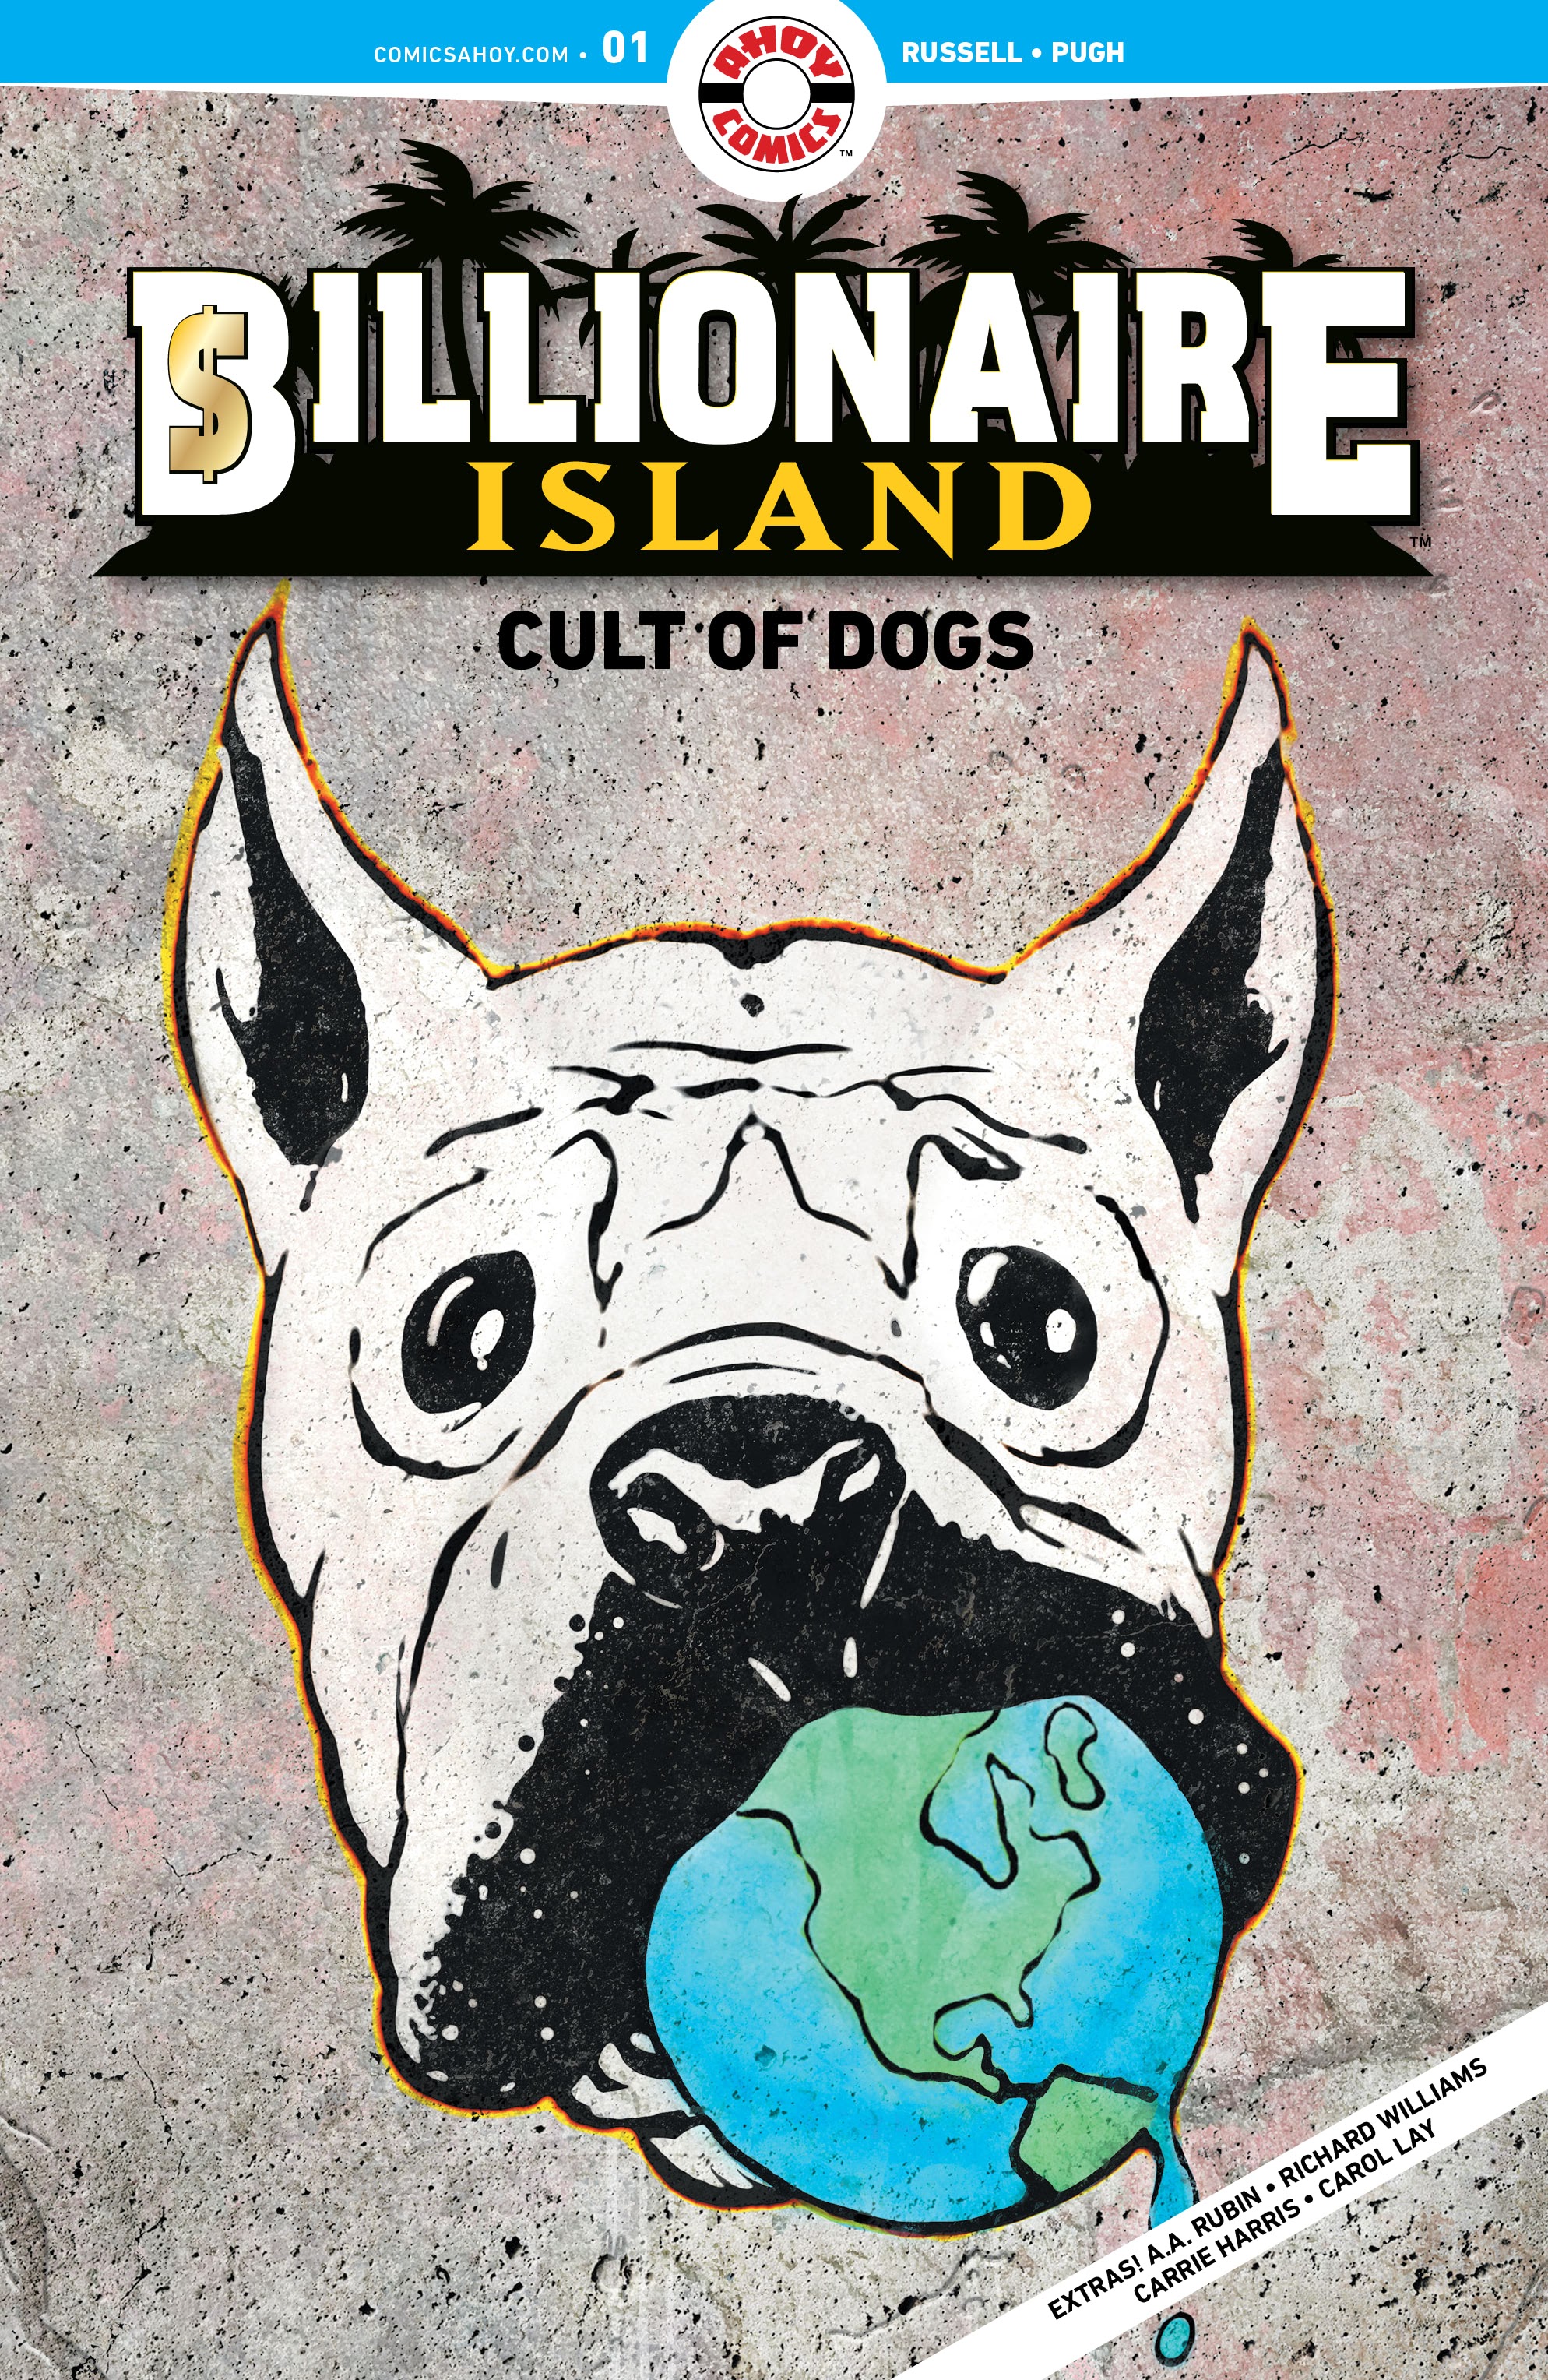 Read online Billionaire Island: Cult of Dogs comic -  Issue #1 - 1